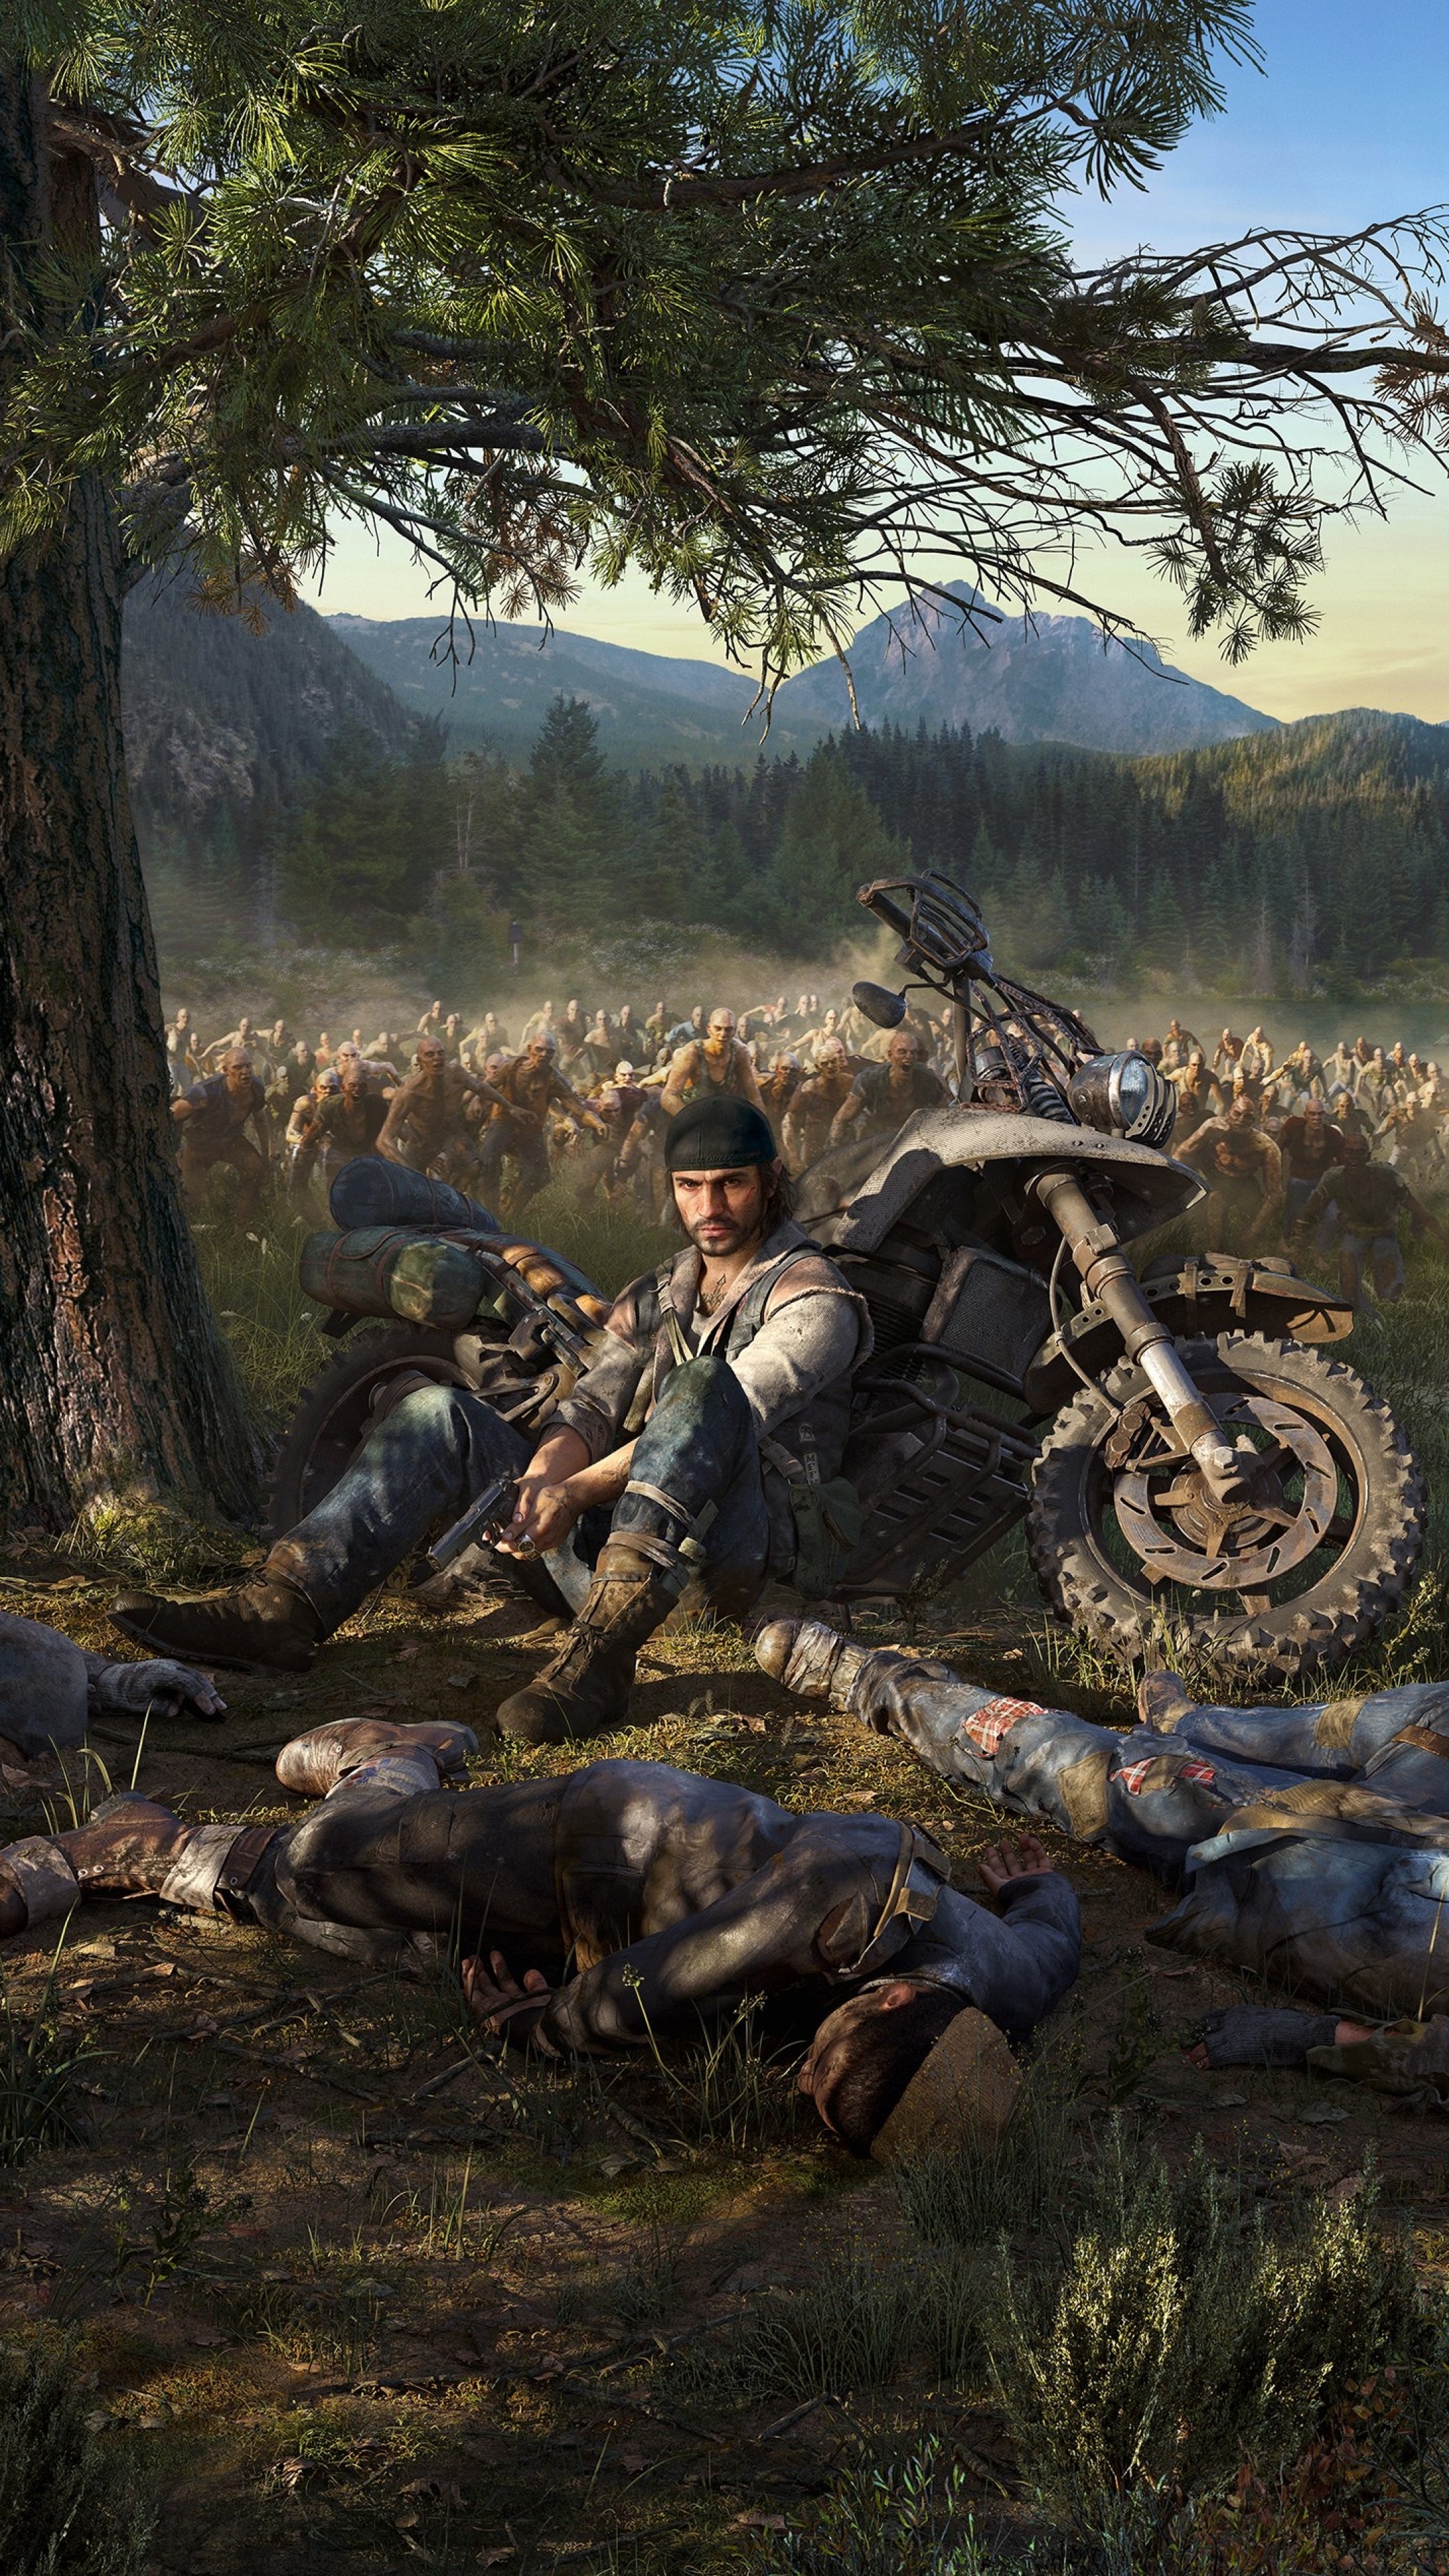 How the game goes. Дейс Гон пс4. Игра Days gone. Days gone на ПС 4. Days gone ps5.